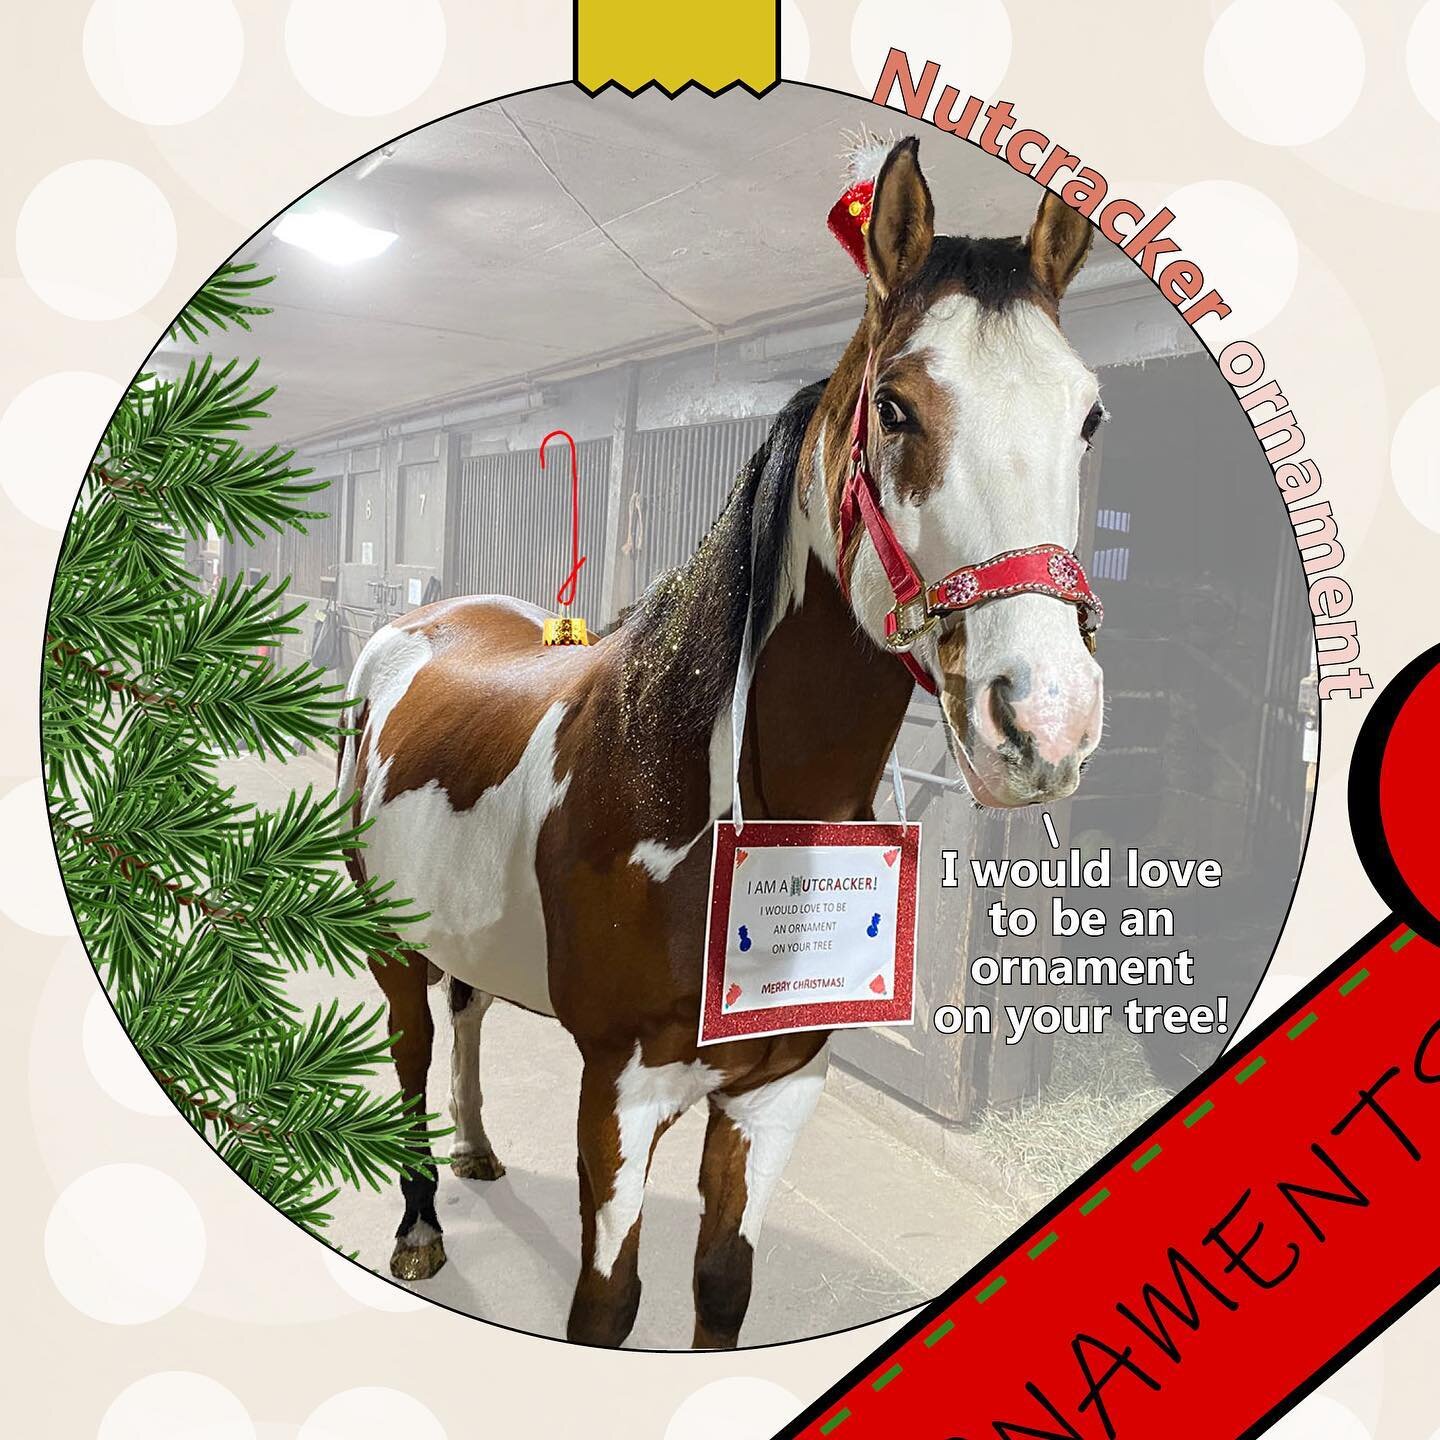 Merry Christmas and Happy Holidays to all on this white Christmas! 

Wanted to share some pics from our horse and stall decorating contest!